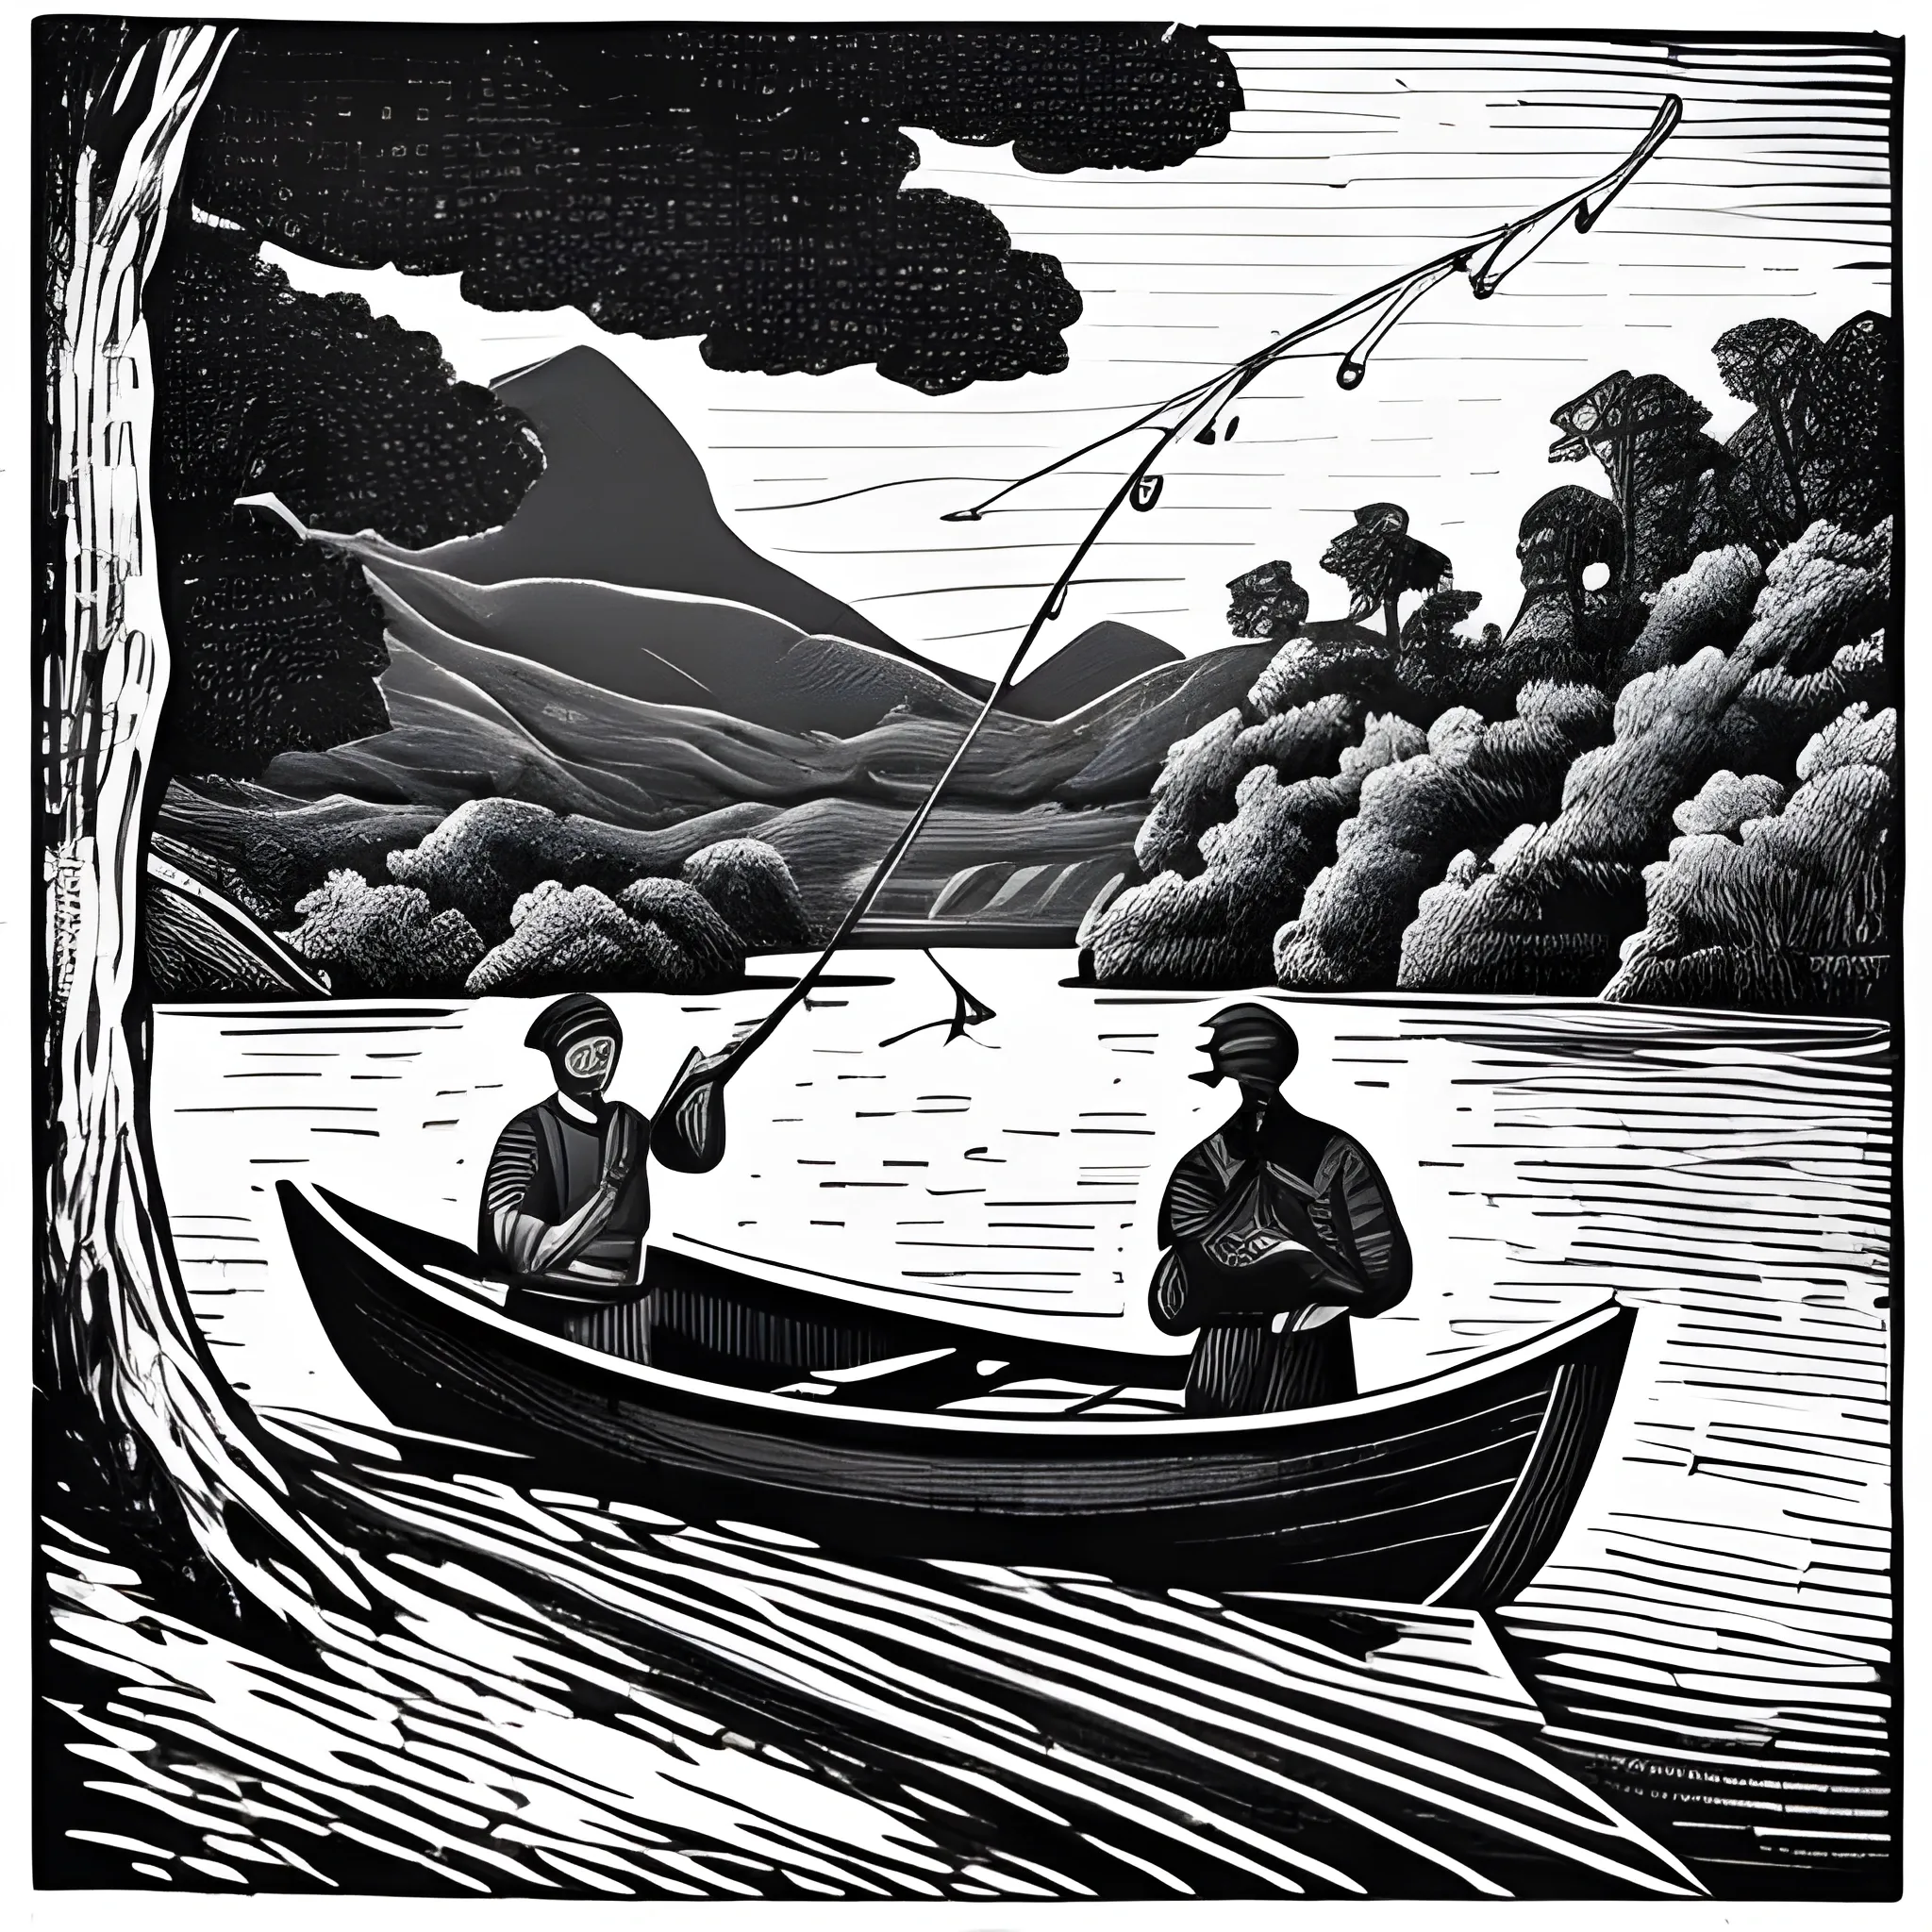 A fisherman was fishing by the river. He sat in a boat and waited quietly for the fish to take the bait. ;Classical black and white woodcut style